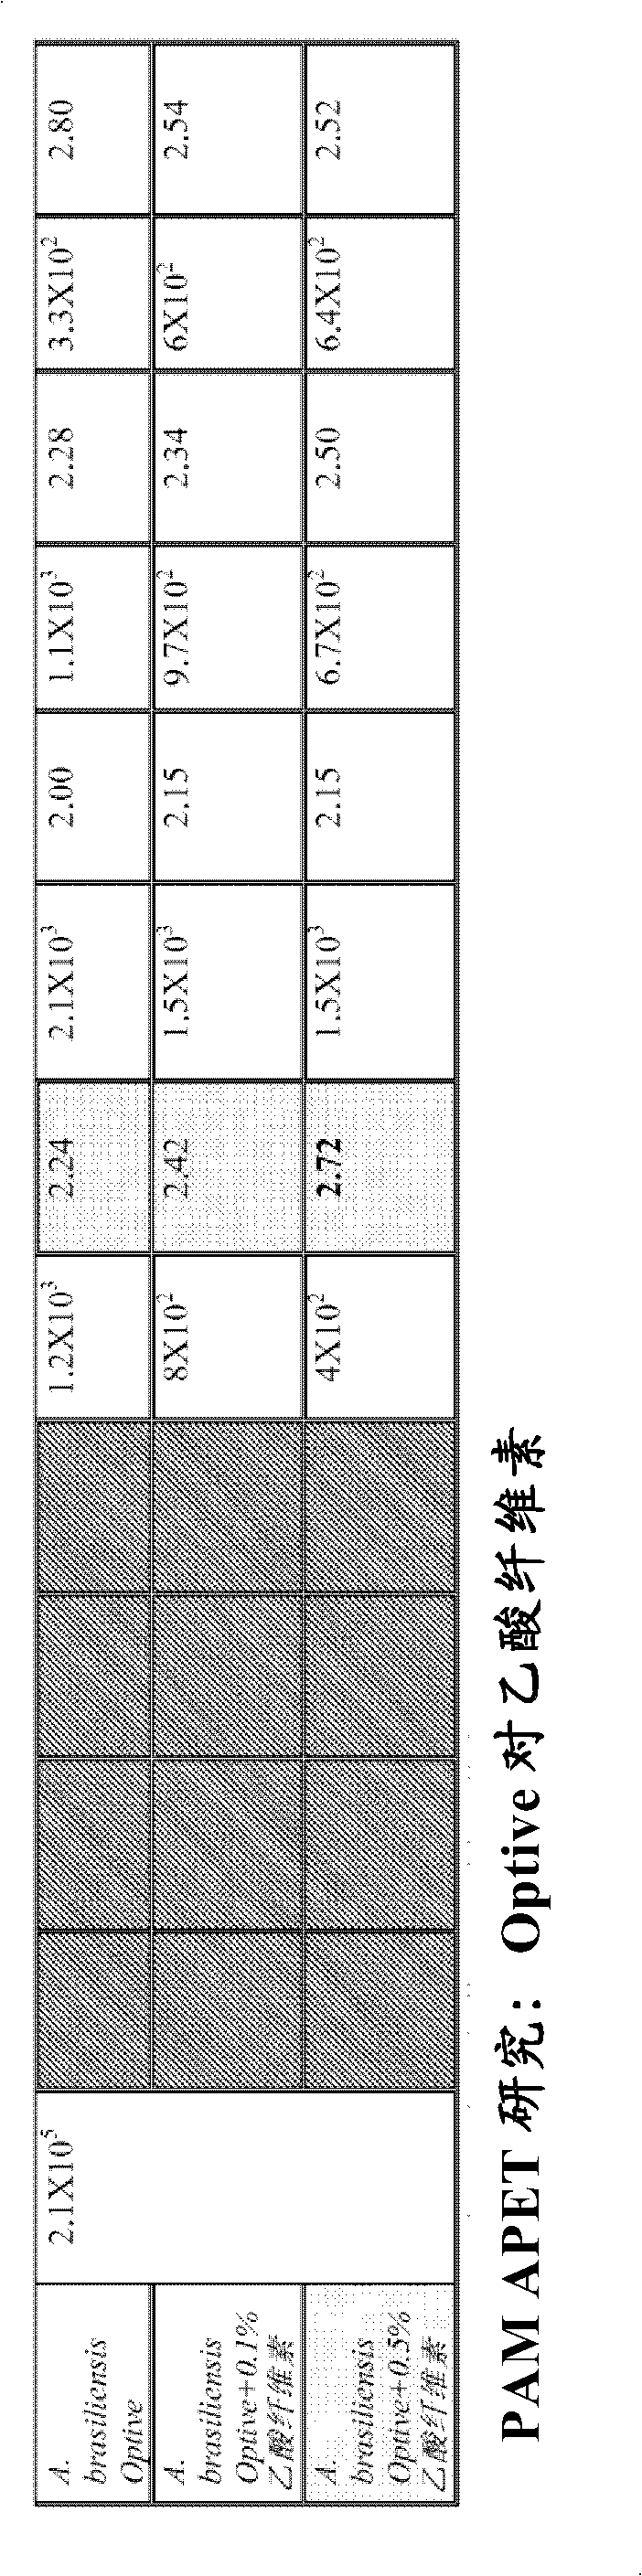 Pharmaceutical ophthalmological liquid compositions containing propionic acid derivatives as a preservative